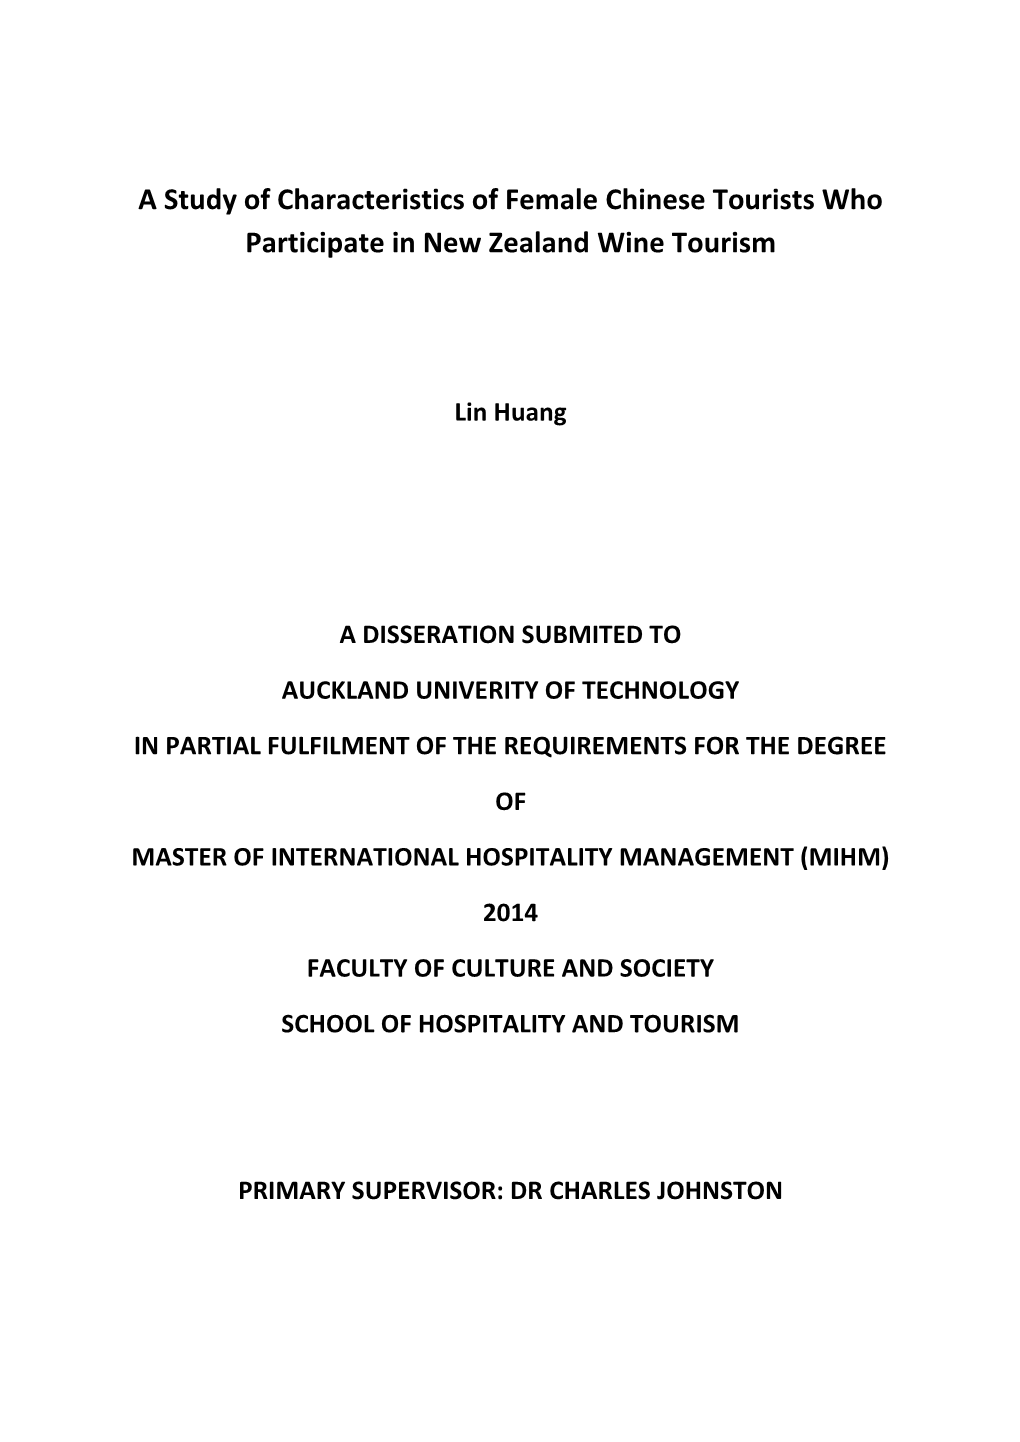 A Study of Characteristics of Female Chinese Tourists Who Participate in New Zealand Wine Tourism